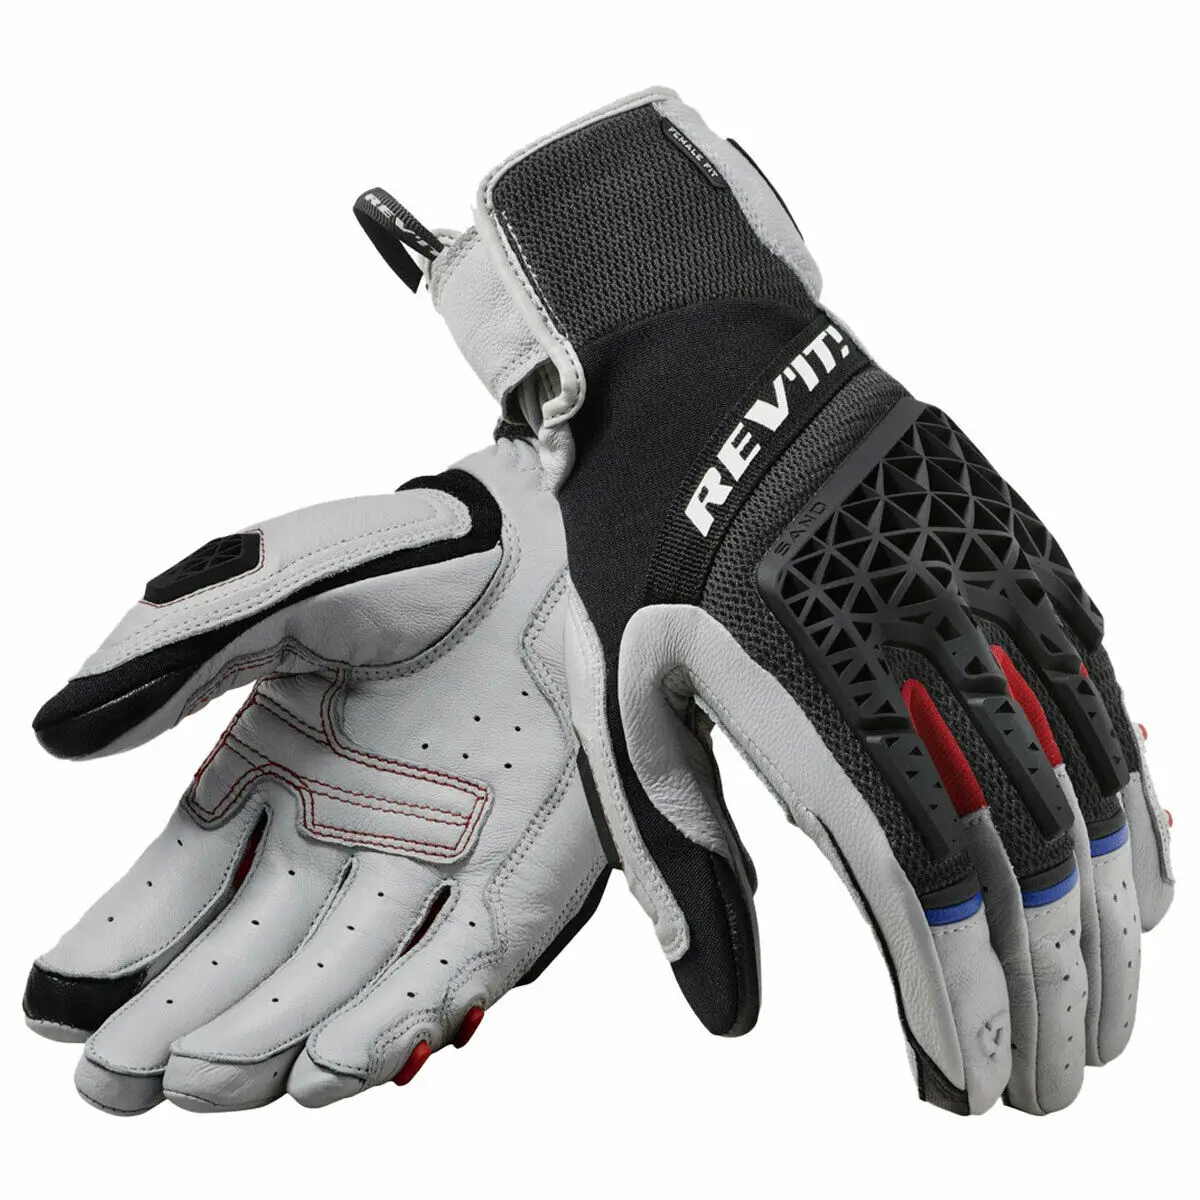 

New Revit Sand 4 Summer Men's Motorcycle Mesh Riding Textile Gloves Genuine Leather Motorbike Racing Glove All Sizes M-XXL